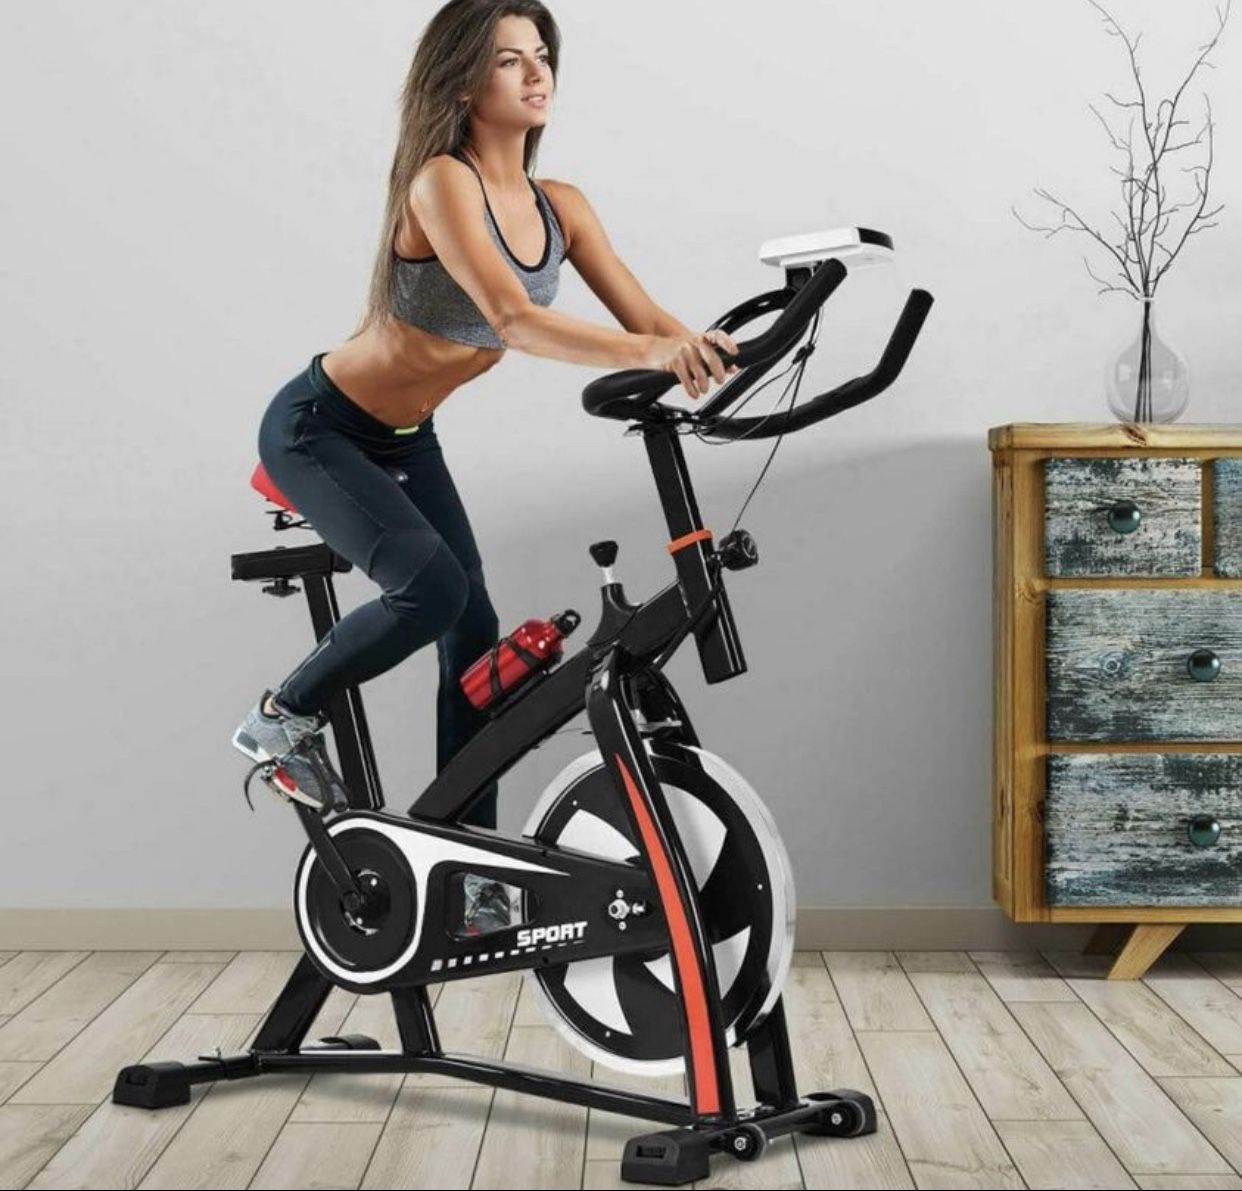 XtremepowerUS Fitness Bicycle Cycling Exercise Bike With Heart Pulse and Adjustable Handlebars and Seat, Red/Black